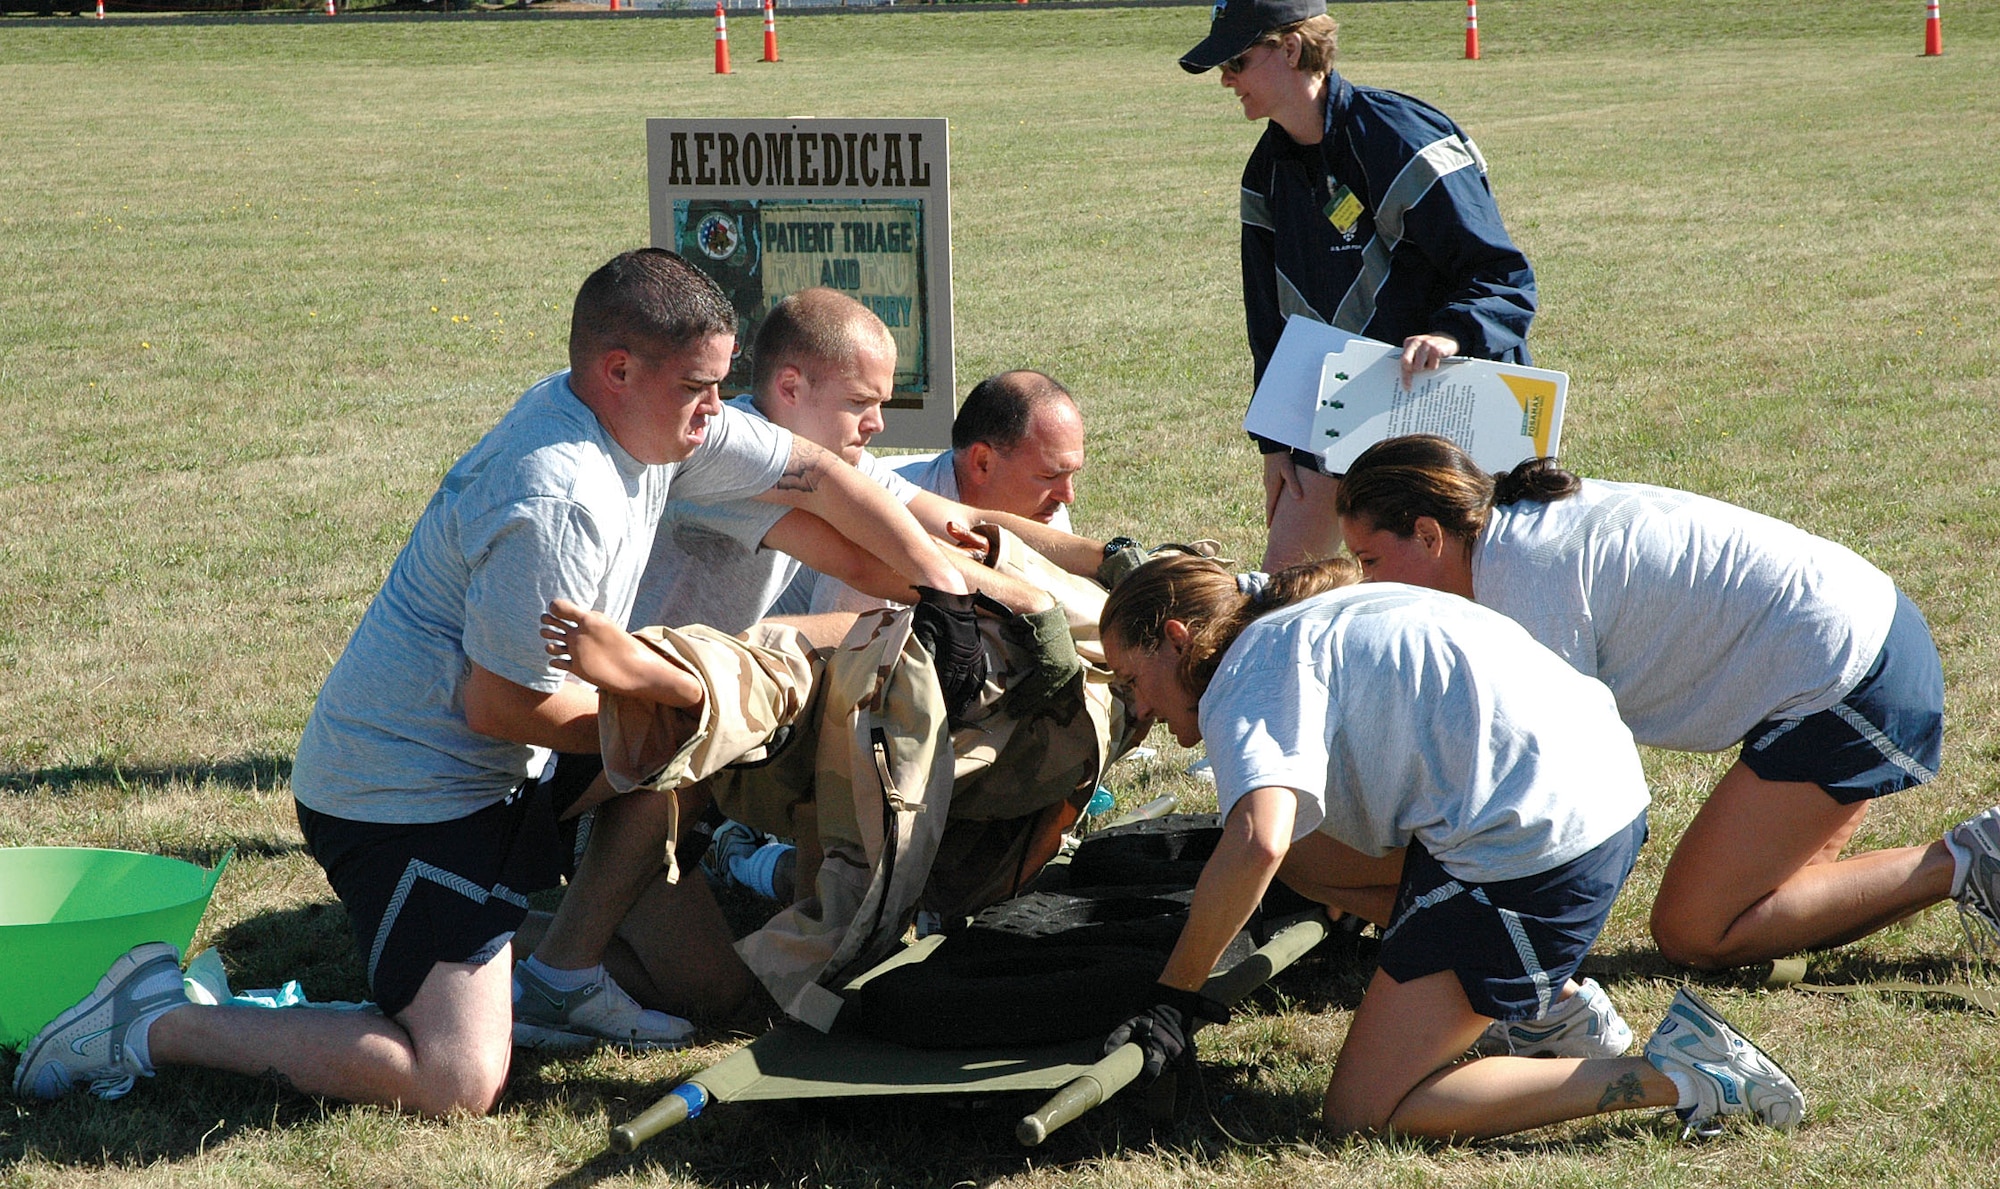 The 446th Aeromedical Evacuation Squadron team moves a mock patieent from the ground to a litter before carryign him through an obstacle course during the AE challenge course at the Rodeo 2007 competition at McChord Air Force Base, Wash., July 23-27. The team wone the Aune Paget Trophy for best aeromedical team and also won the best aeromedical contingency flight award. (U.S. Air Force photo/Capt. Jennifer Gerhardt)